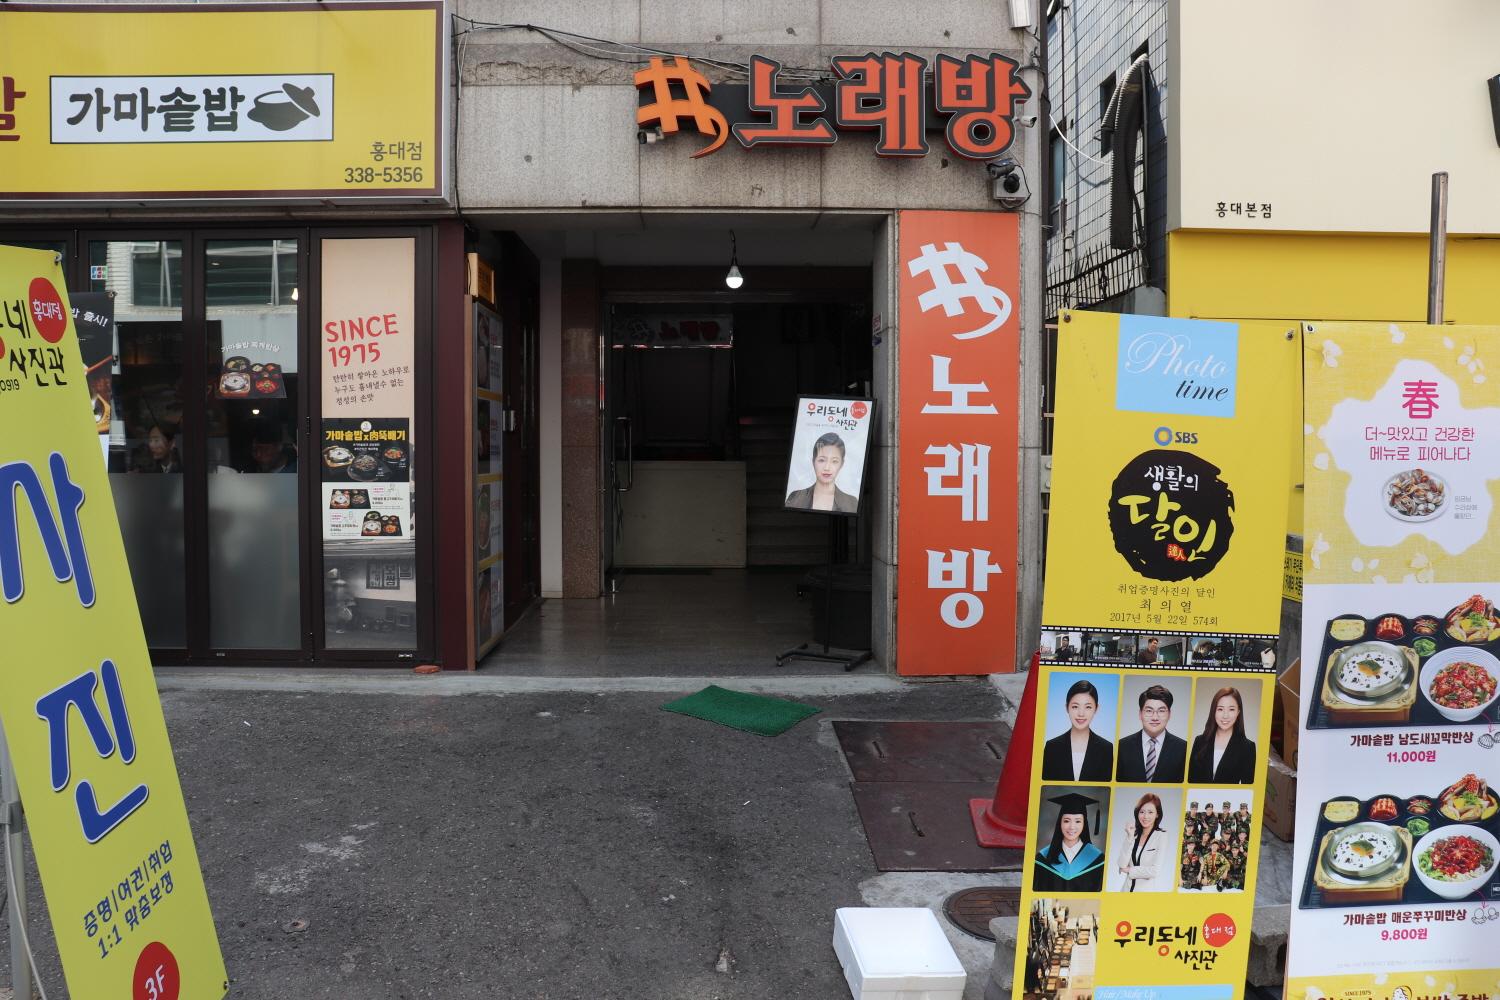 Exterior of 우리동네사진관 홍대점 in Korea showcasing fixtures, advertising posters, signage, logo, and a vending machine near the entrance.